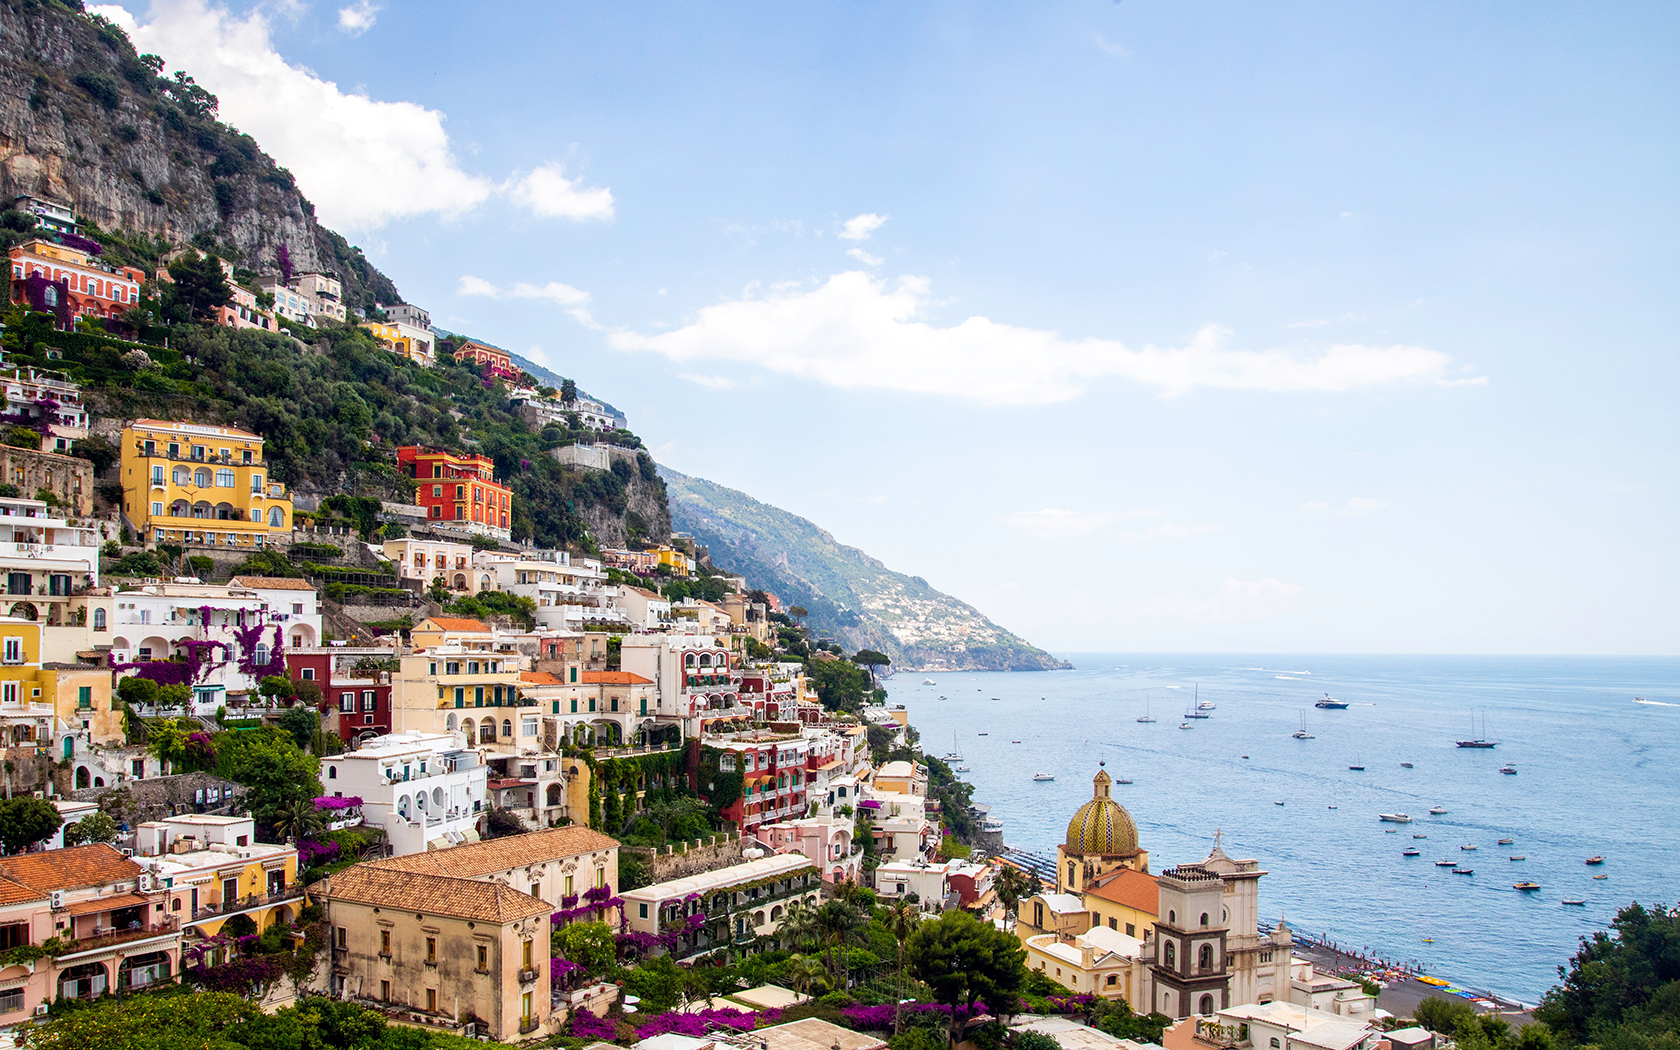 Positano, a day trip from Sorrento. Photo by Sander Crombach on Unsplash